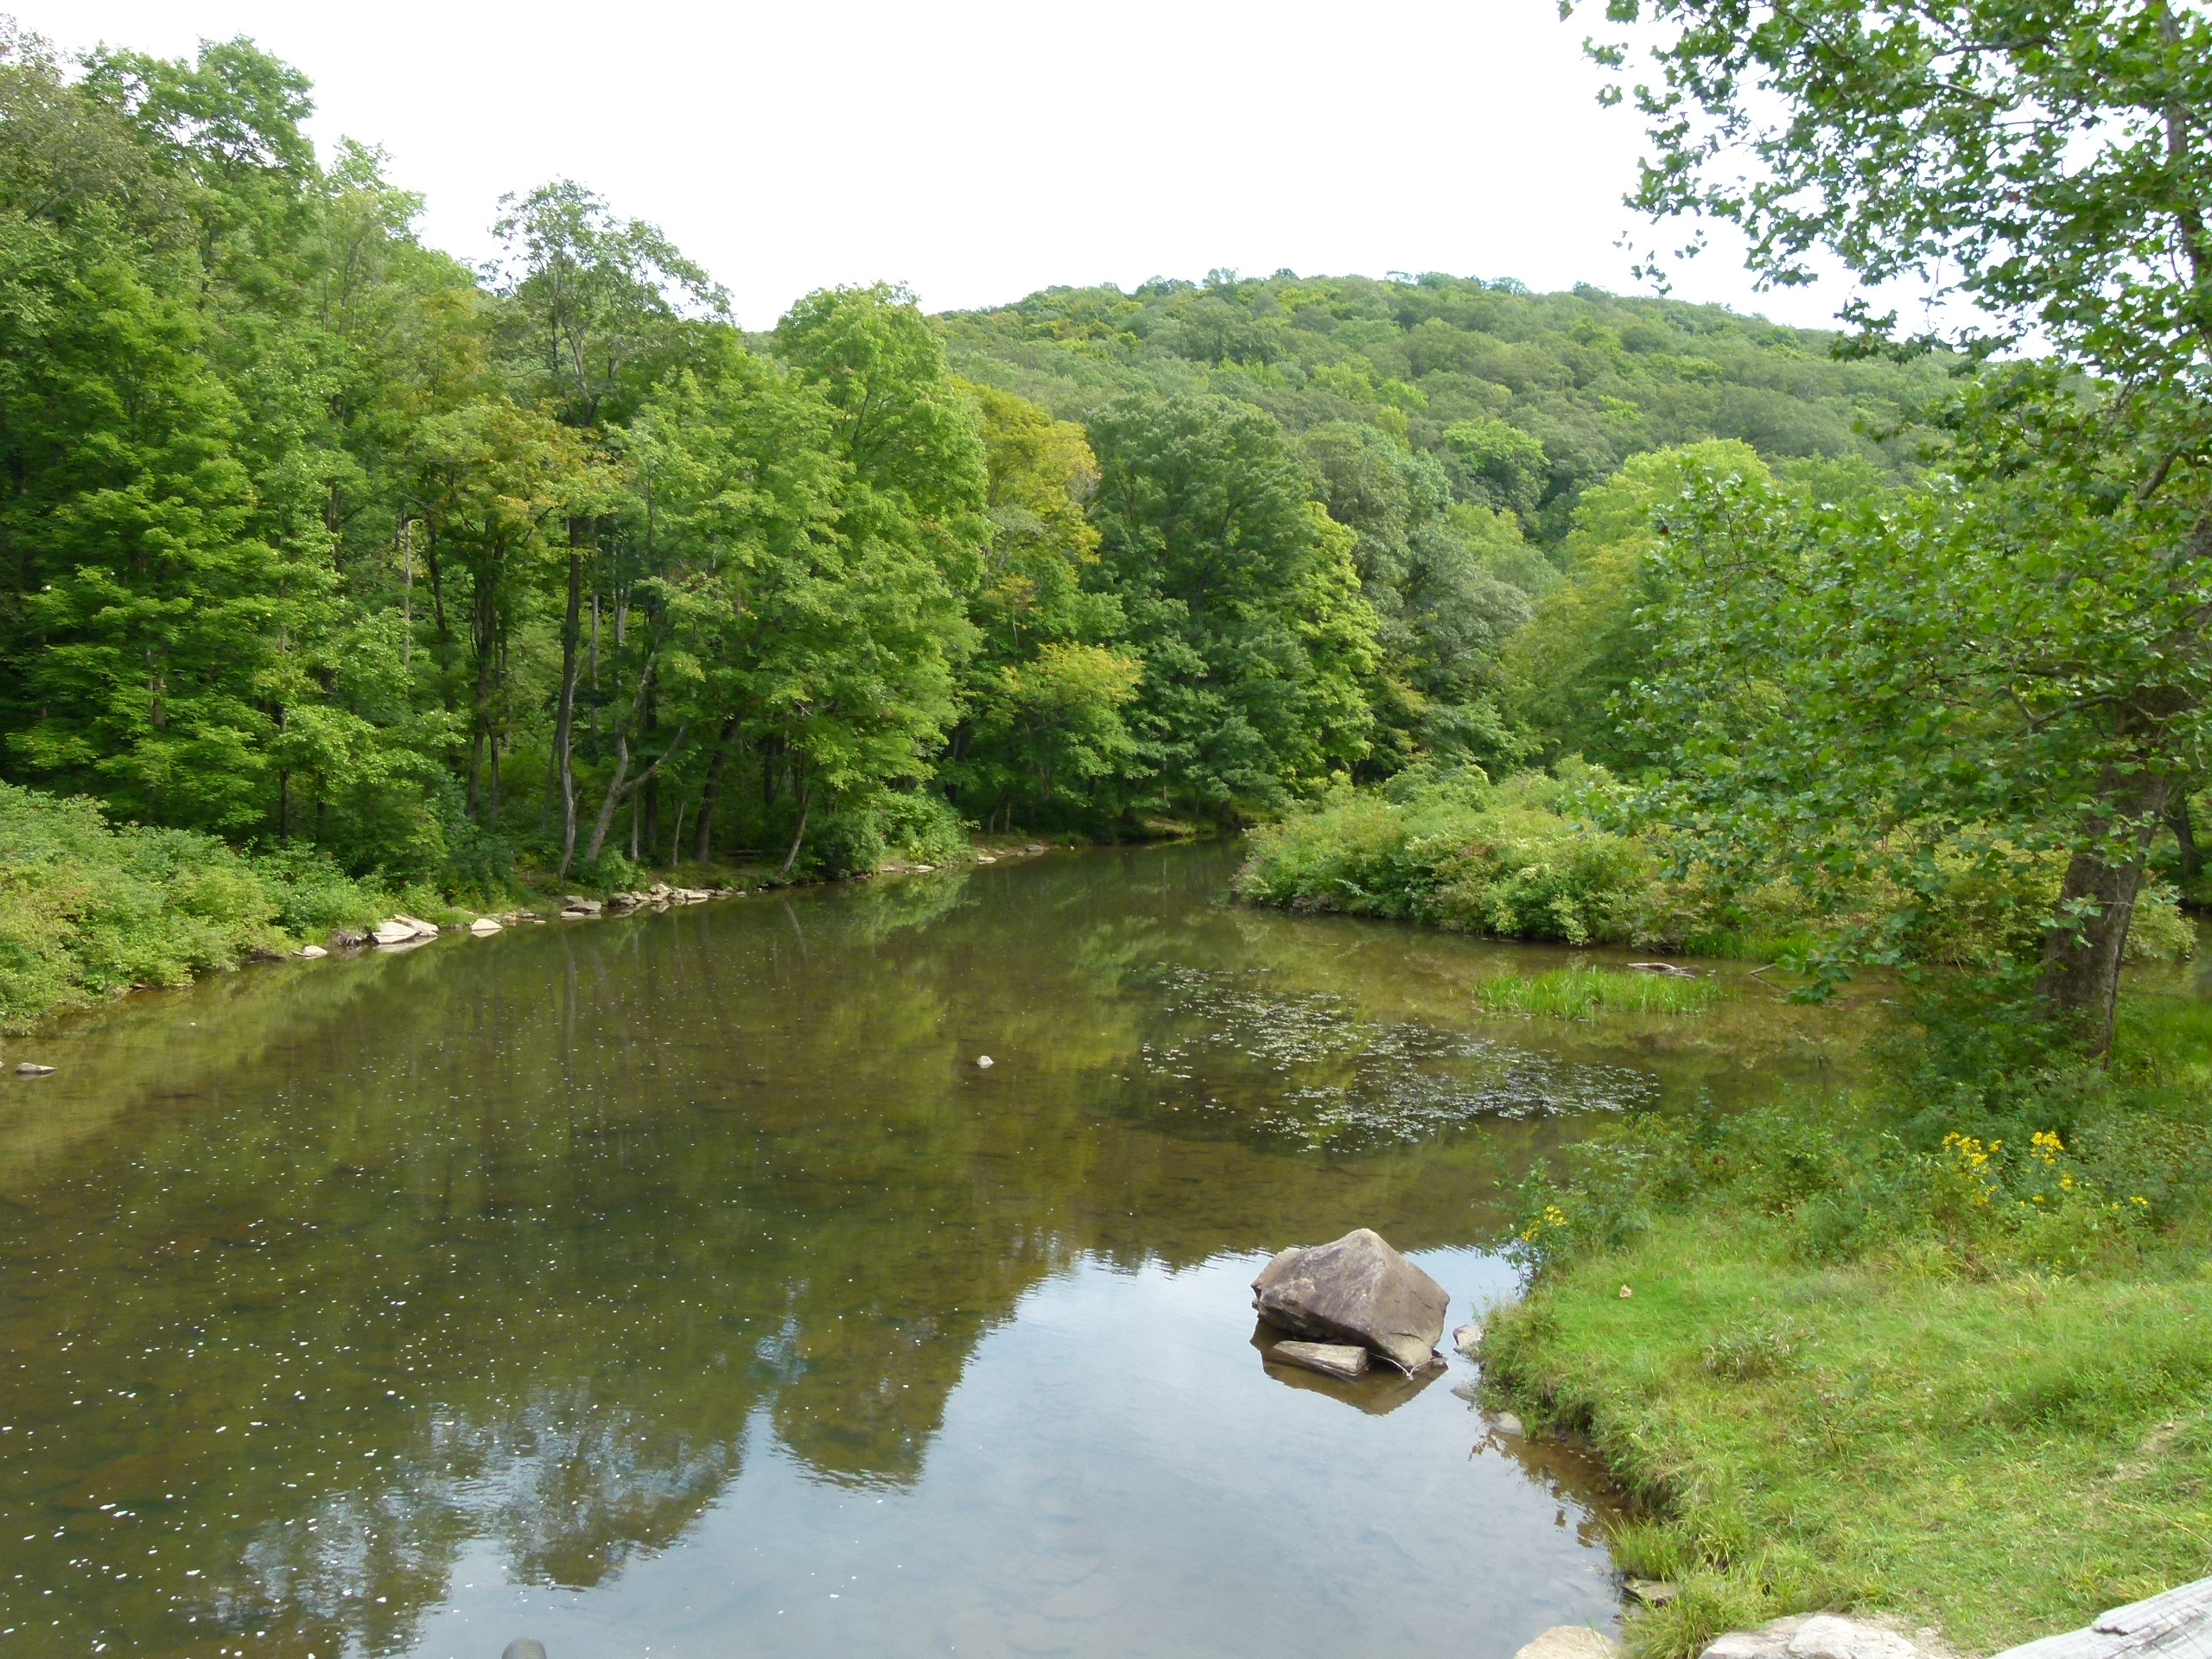 The downstream view of Laurel Hill Creek from the bridge.